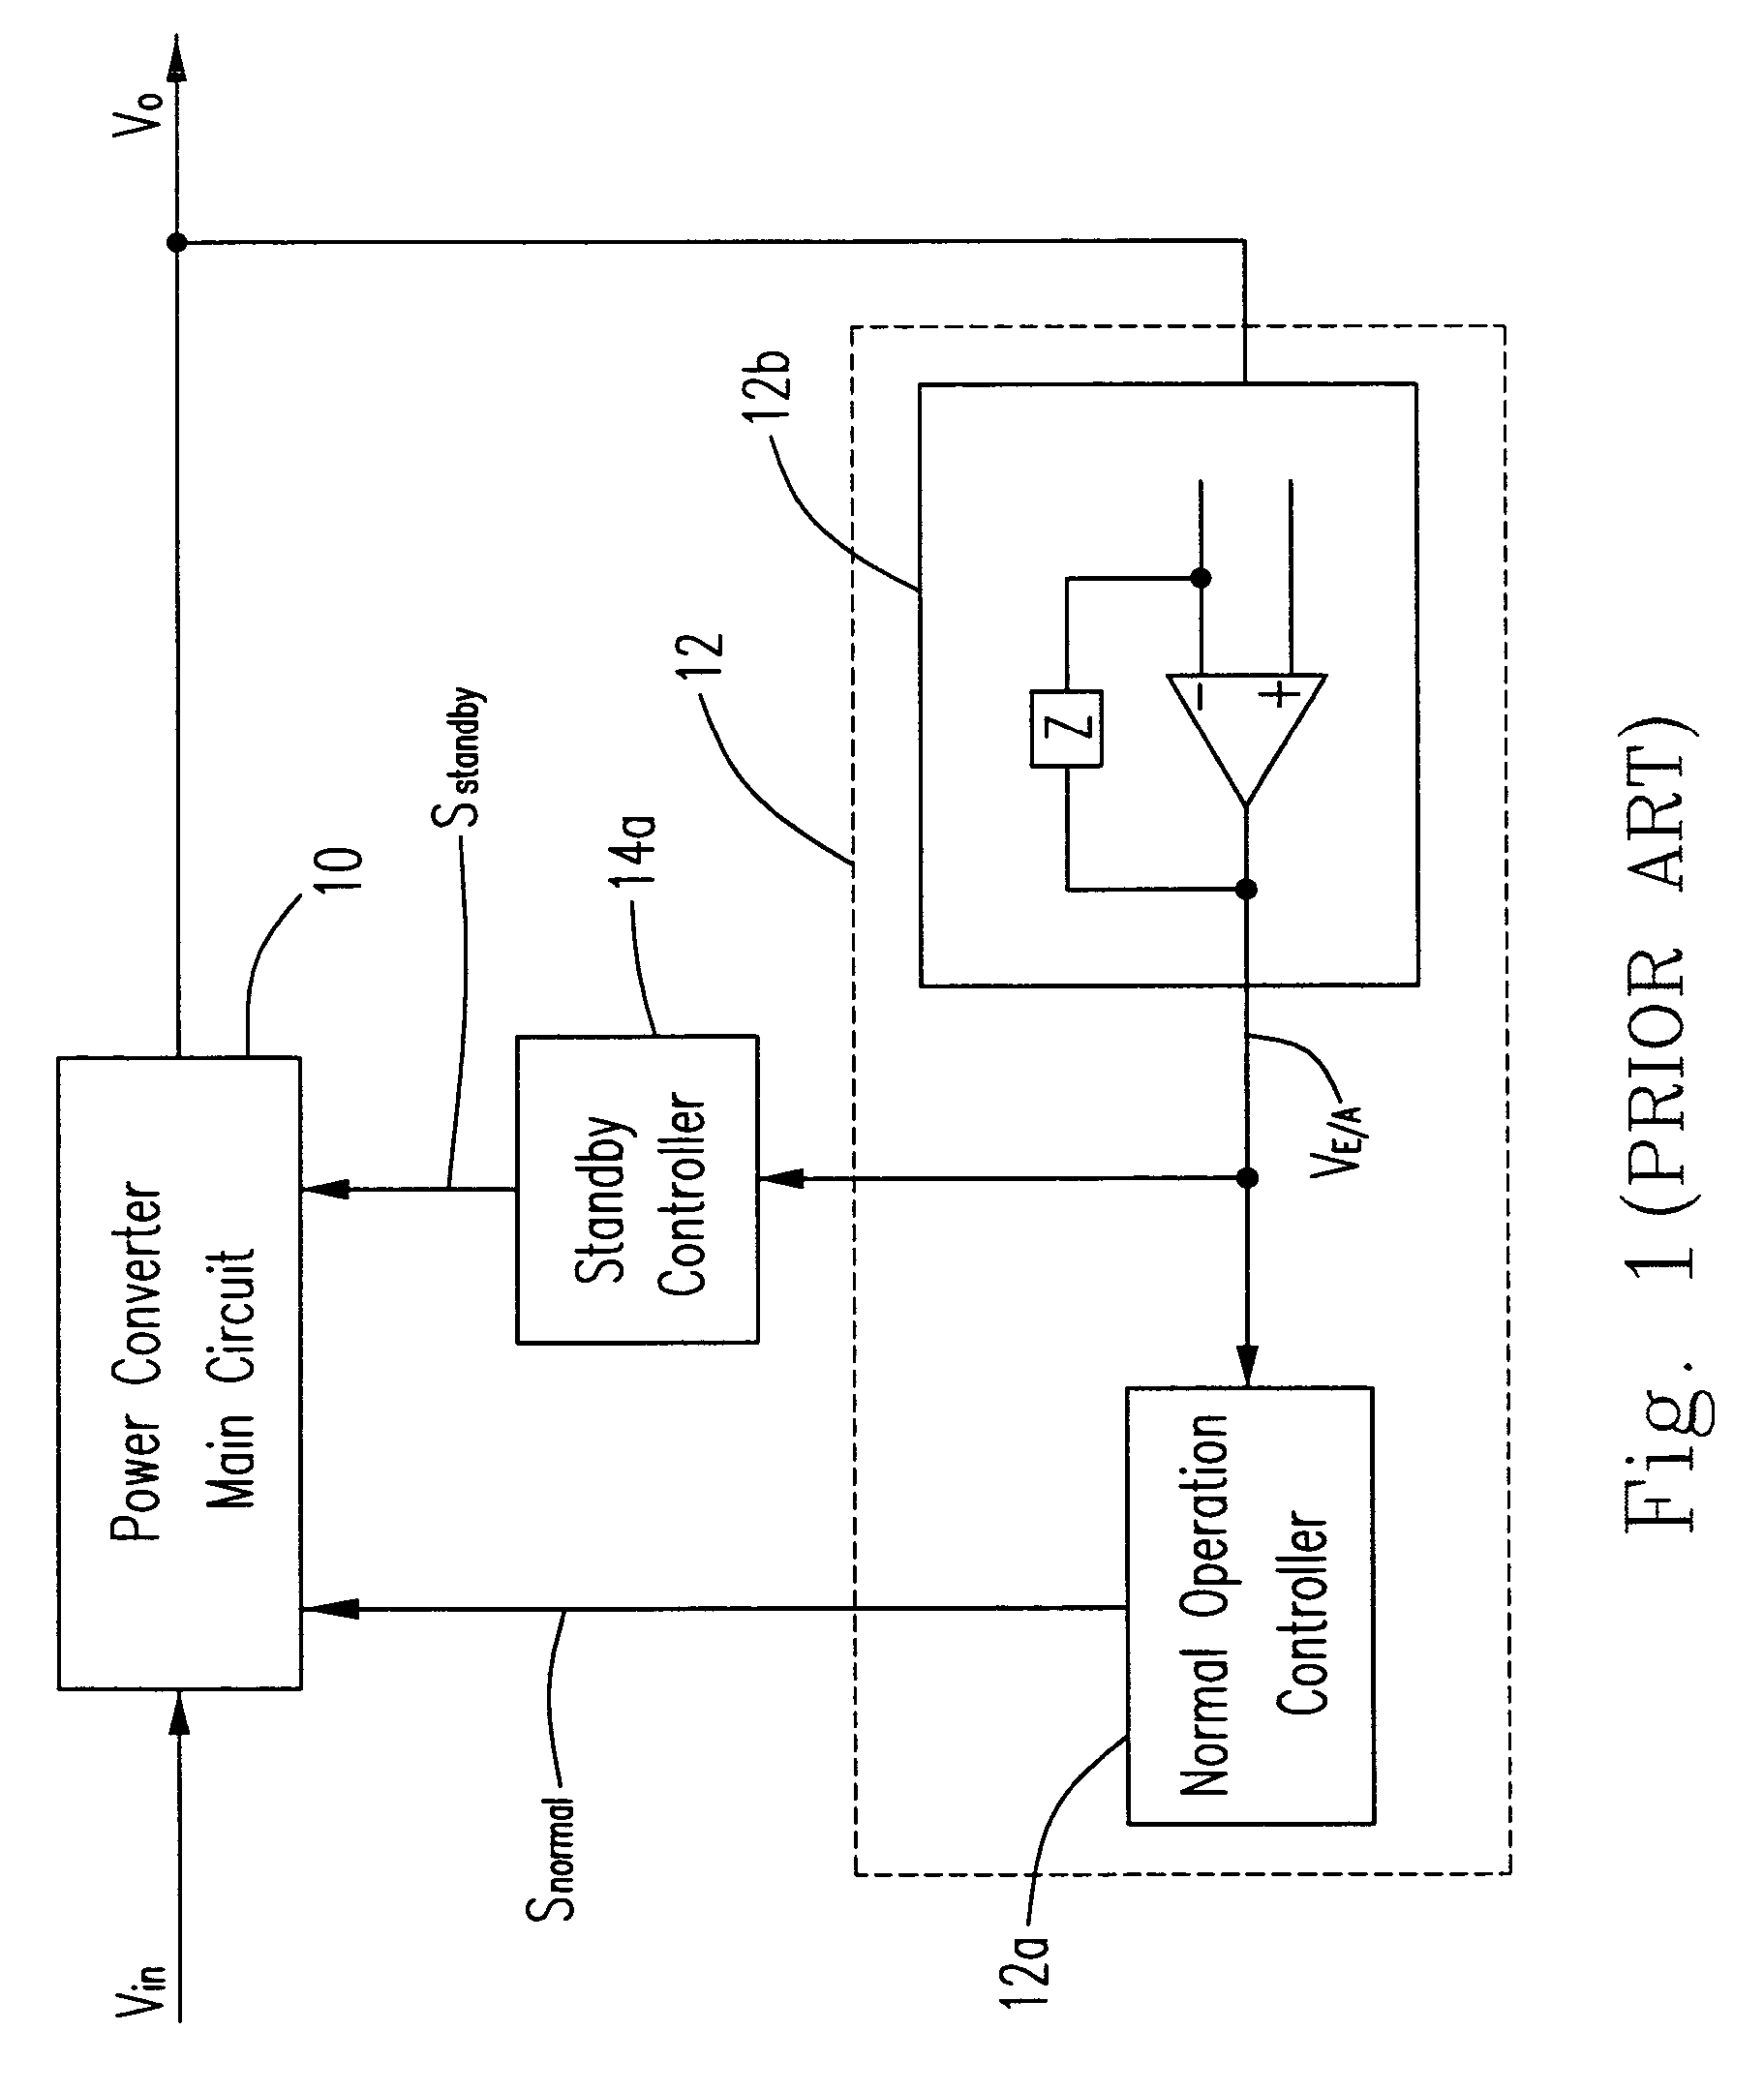 Power supply having efficient low power standby mode